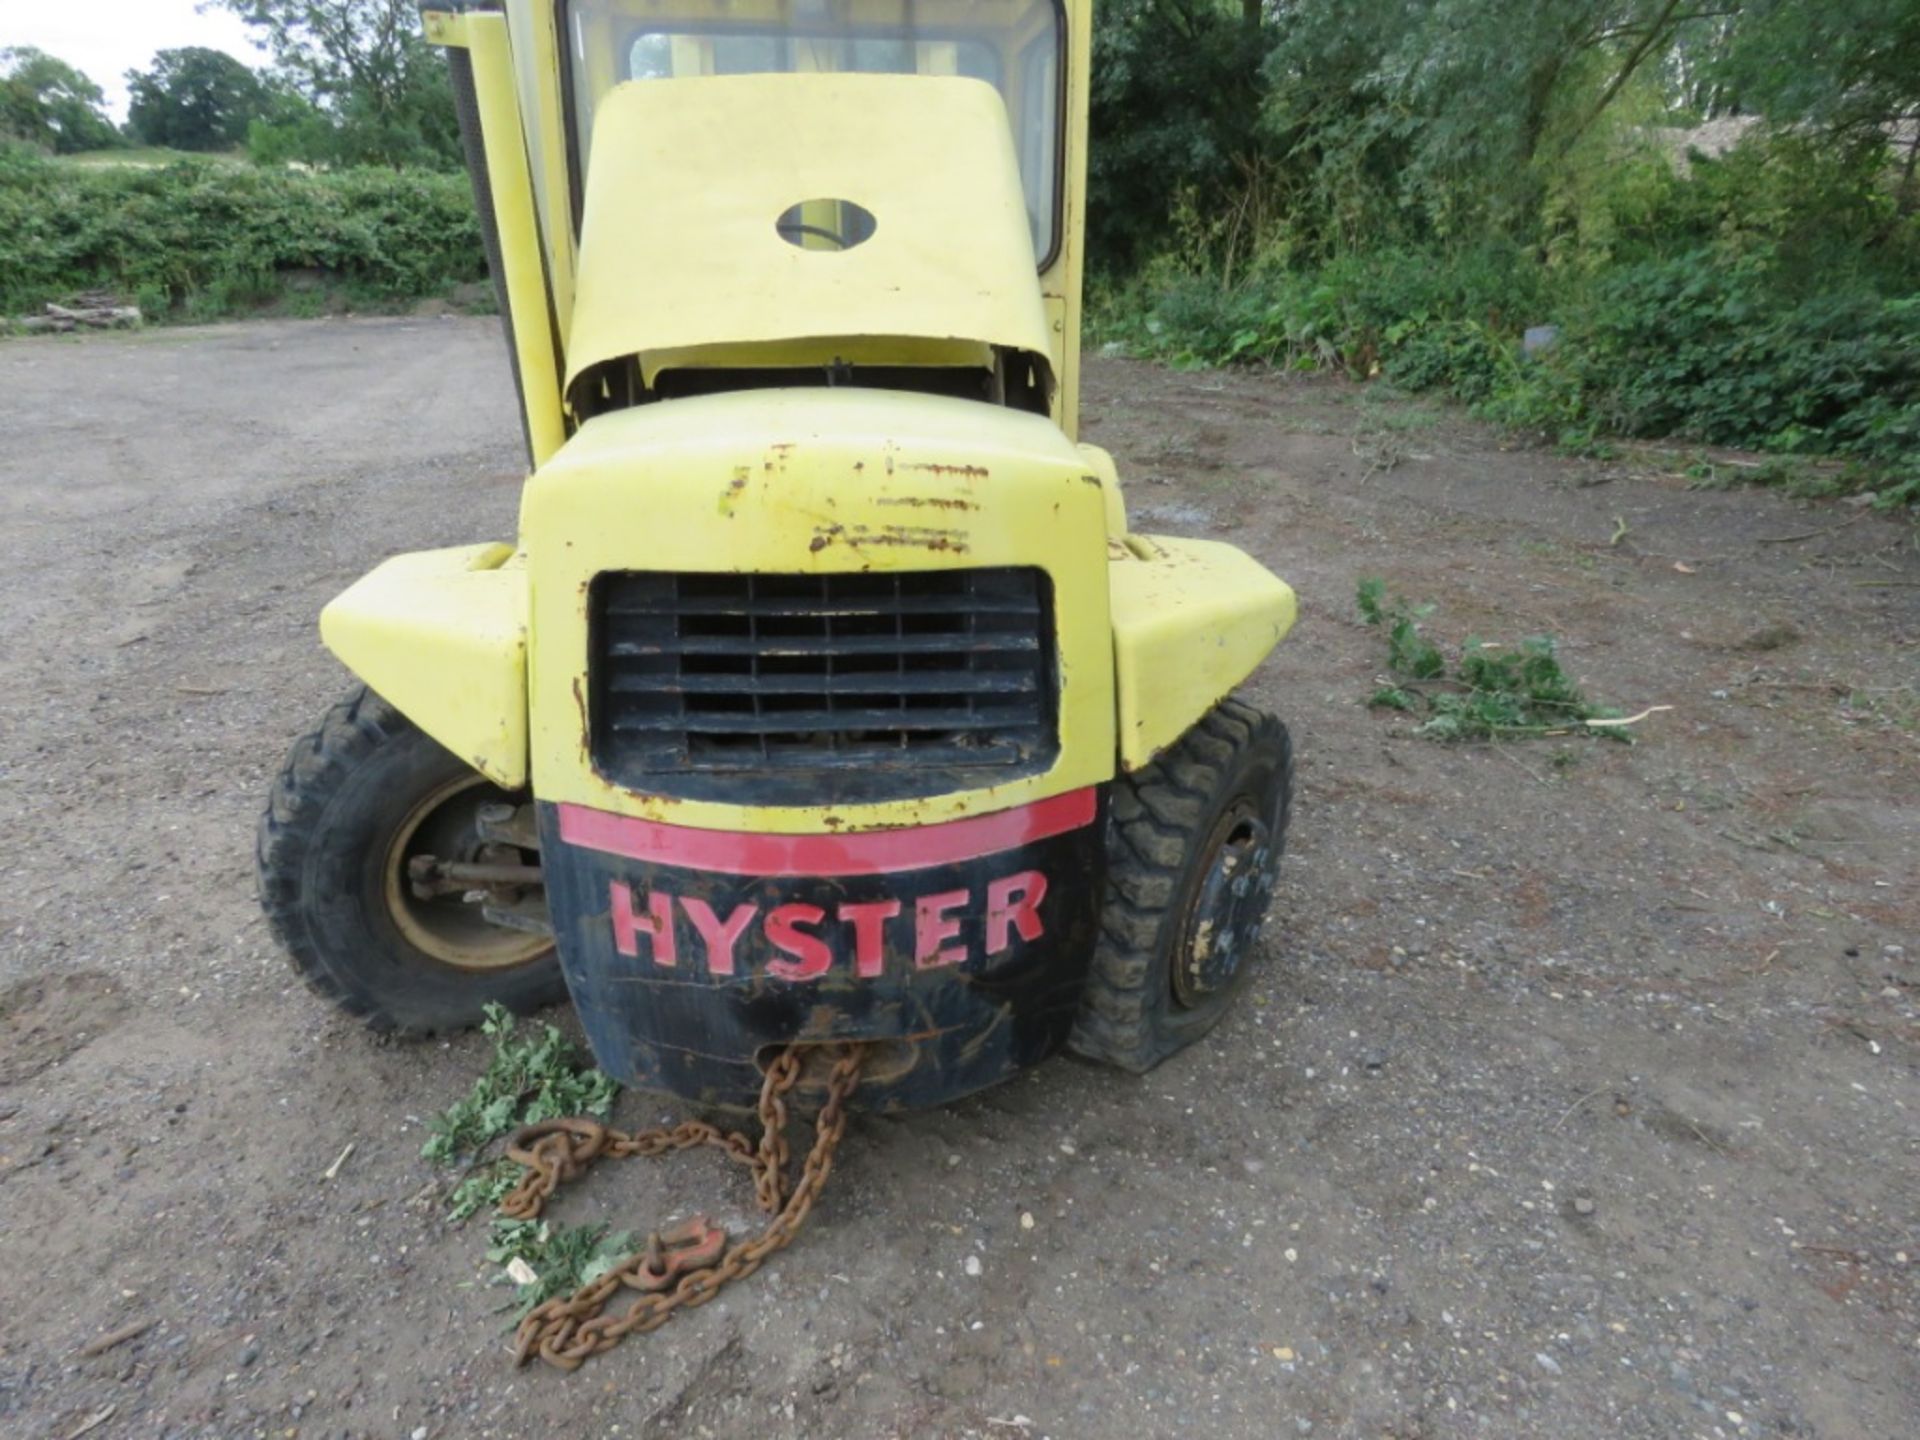 HYSTER H130F FORKLIFT TRUCK...NON RUNNER 6500KG RATED CAPACITY - Image 14 of 24